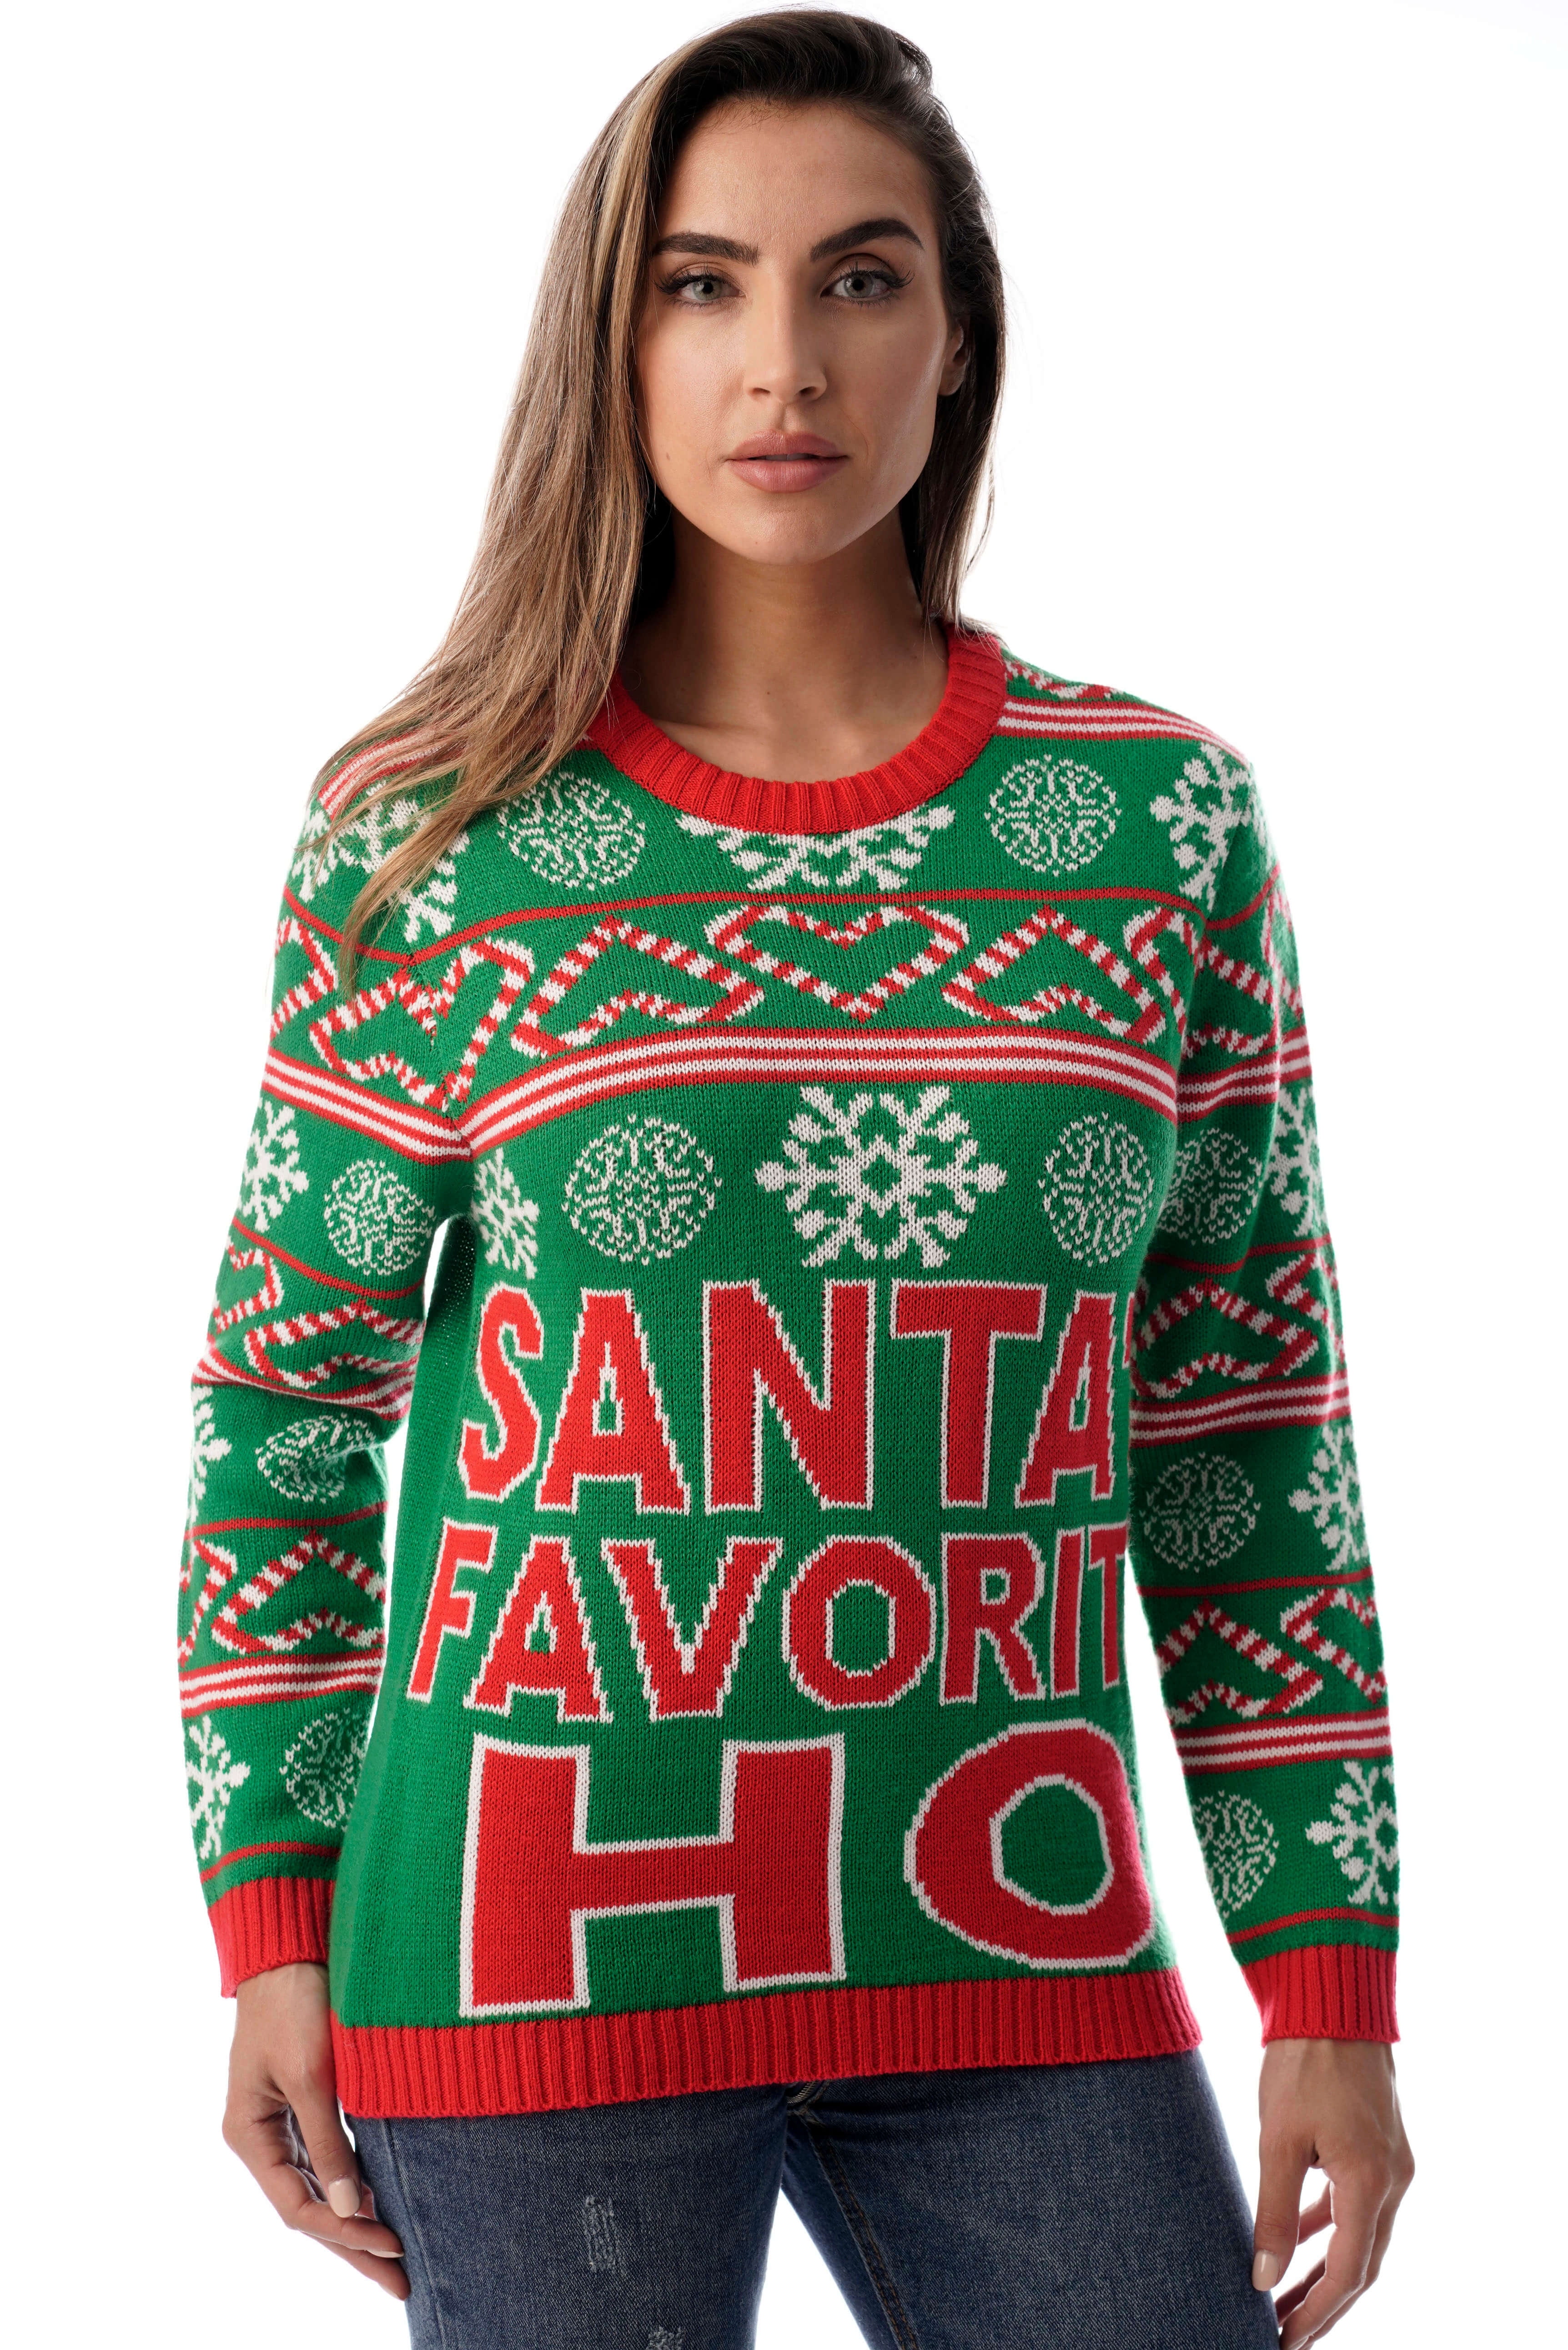 #followme Womens Ugly Christmas Sweater - Sweaters for Women (Green ...